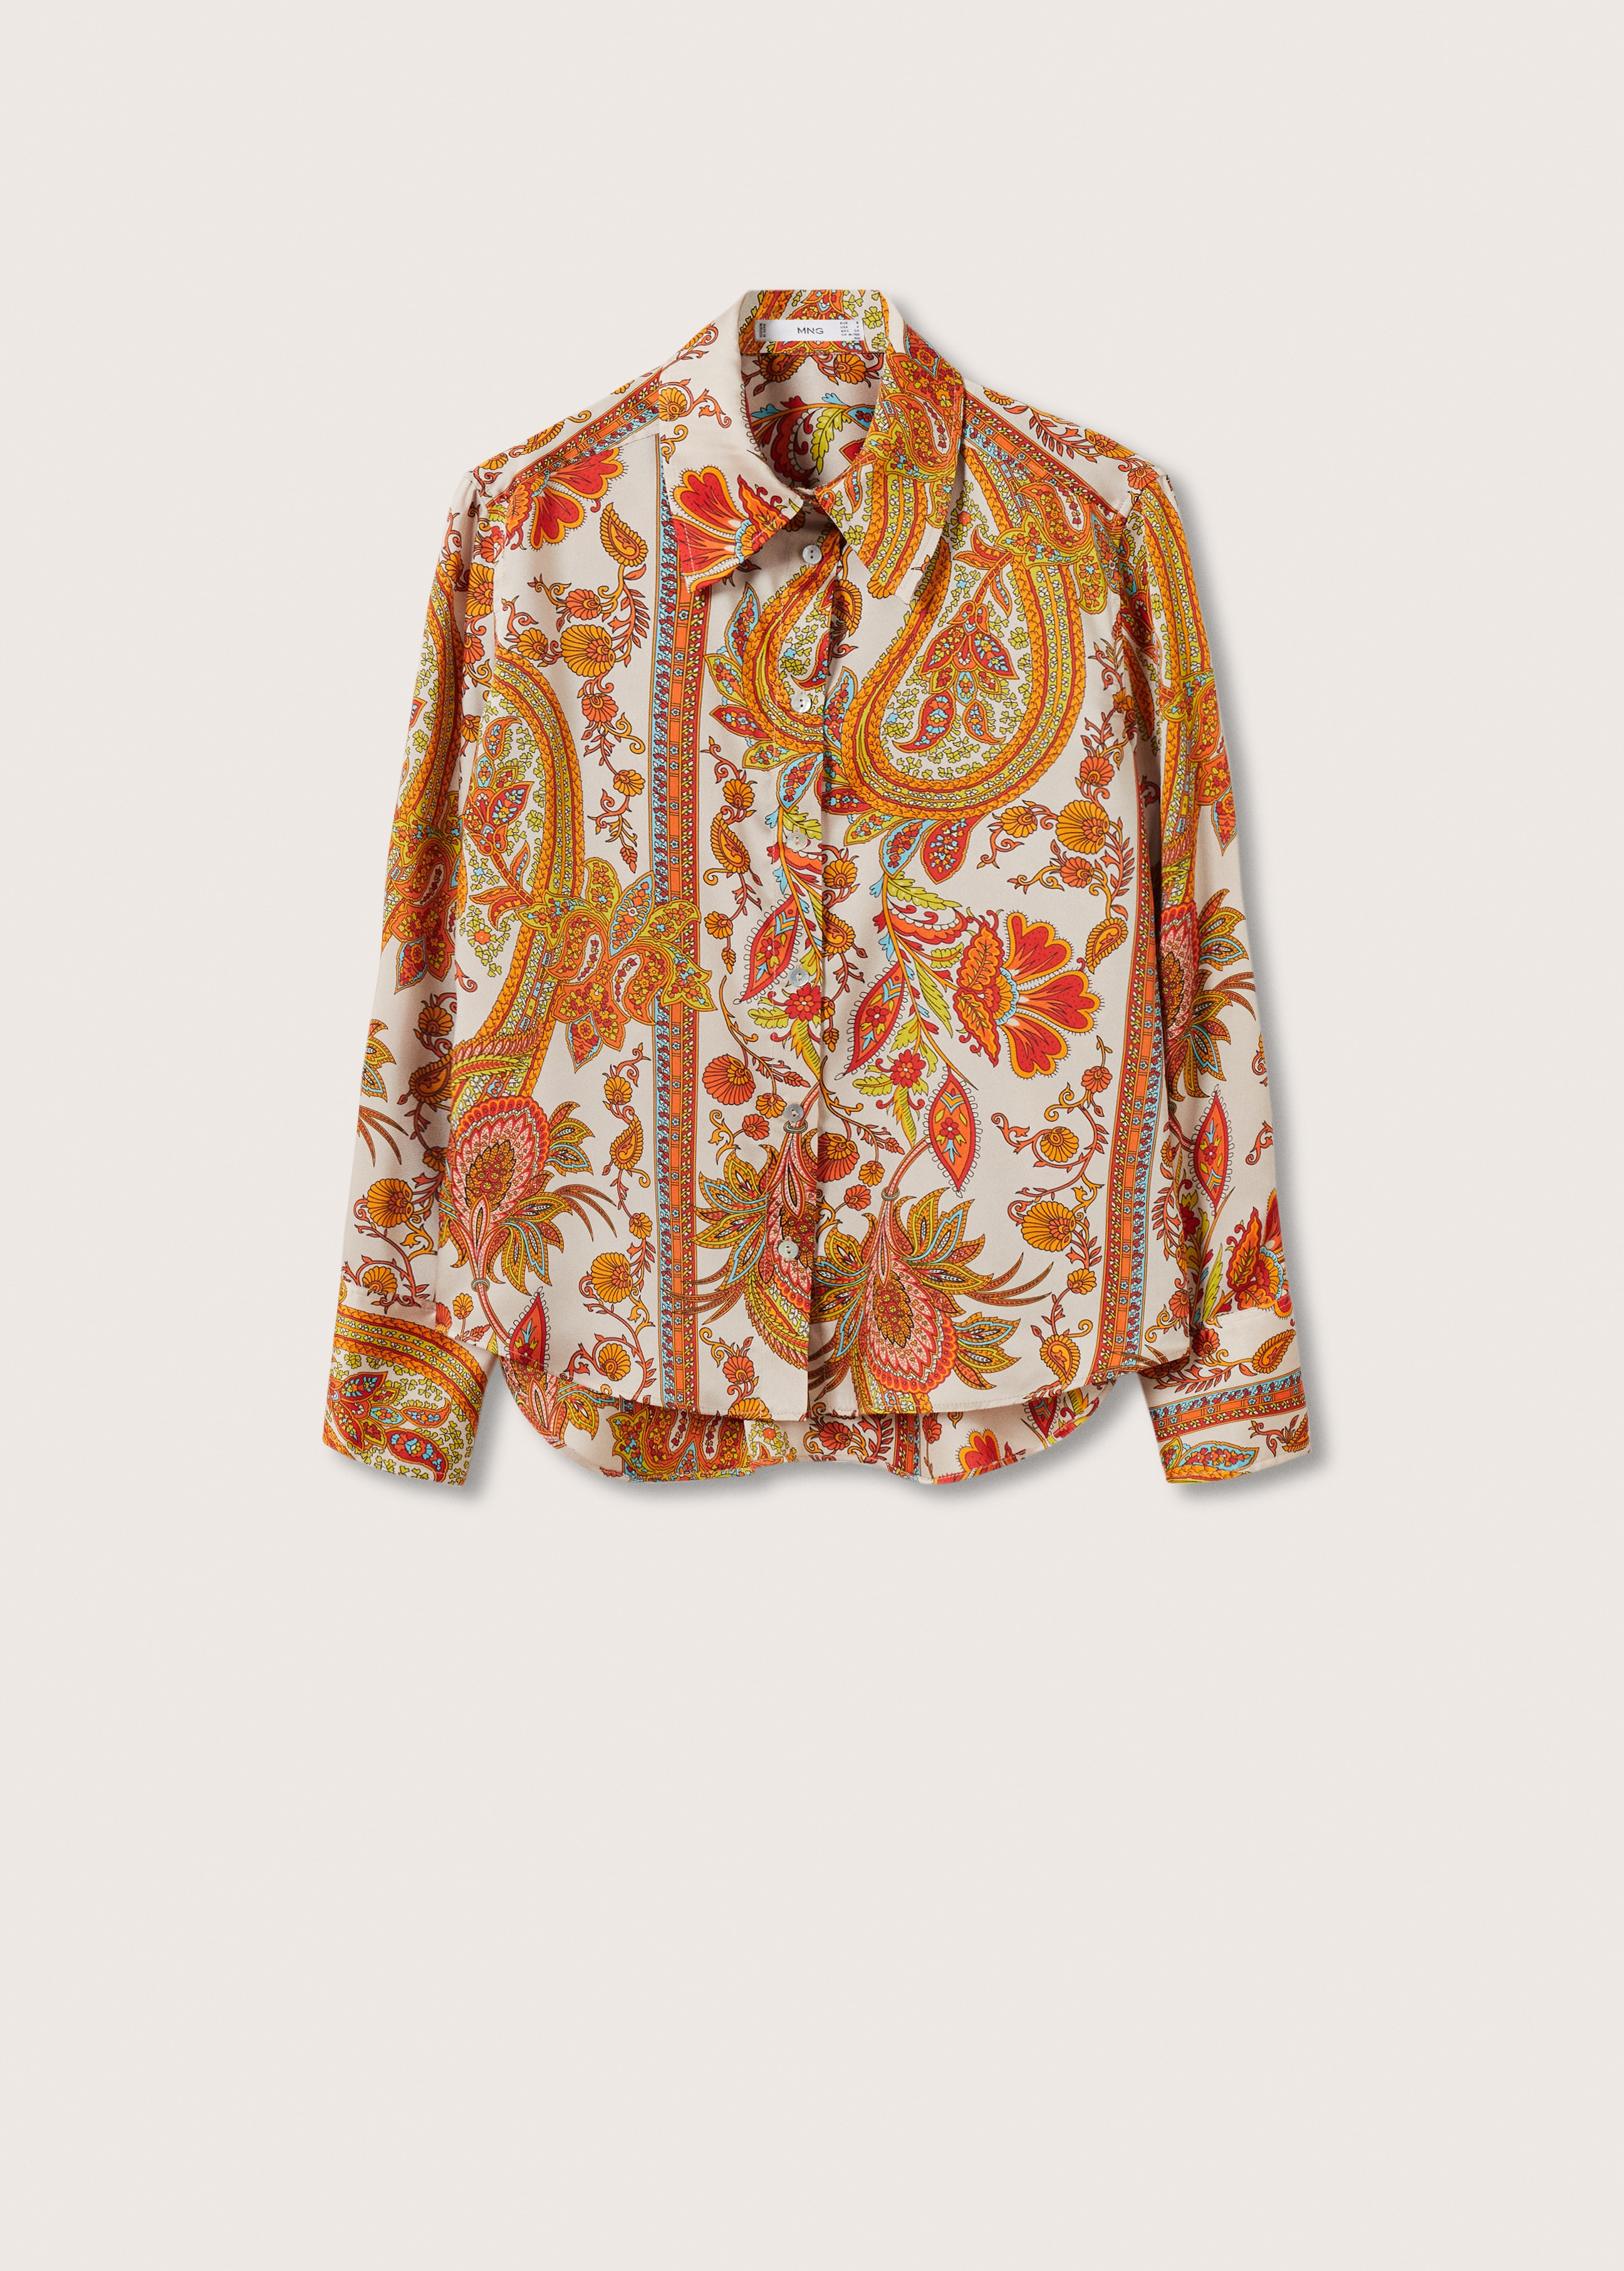 Paisley print shirt - Article without model